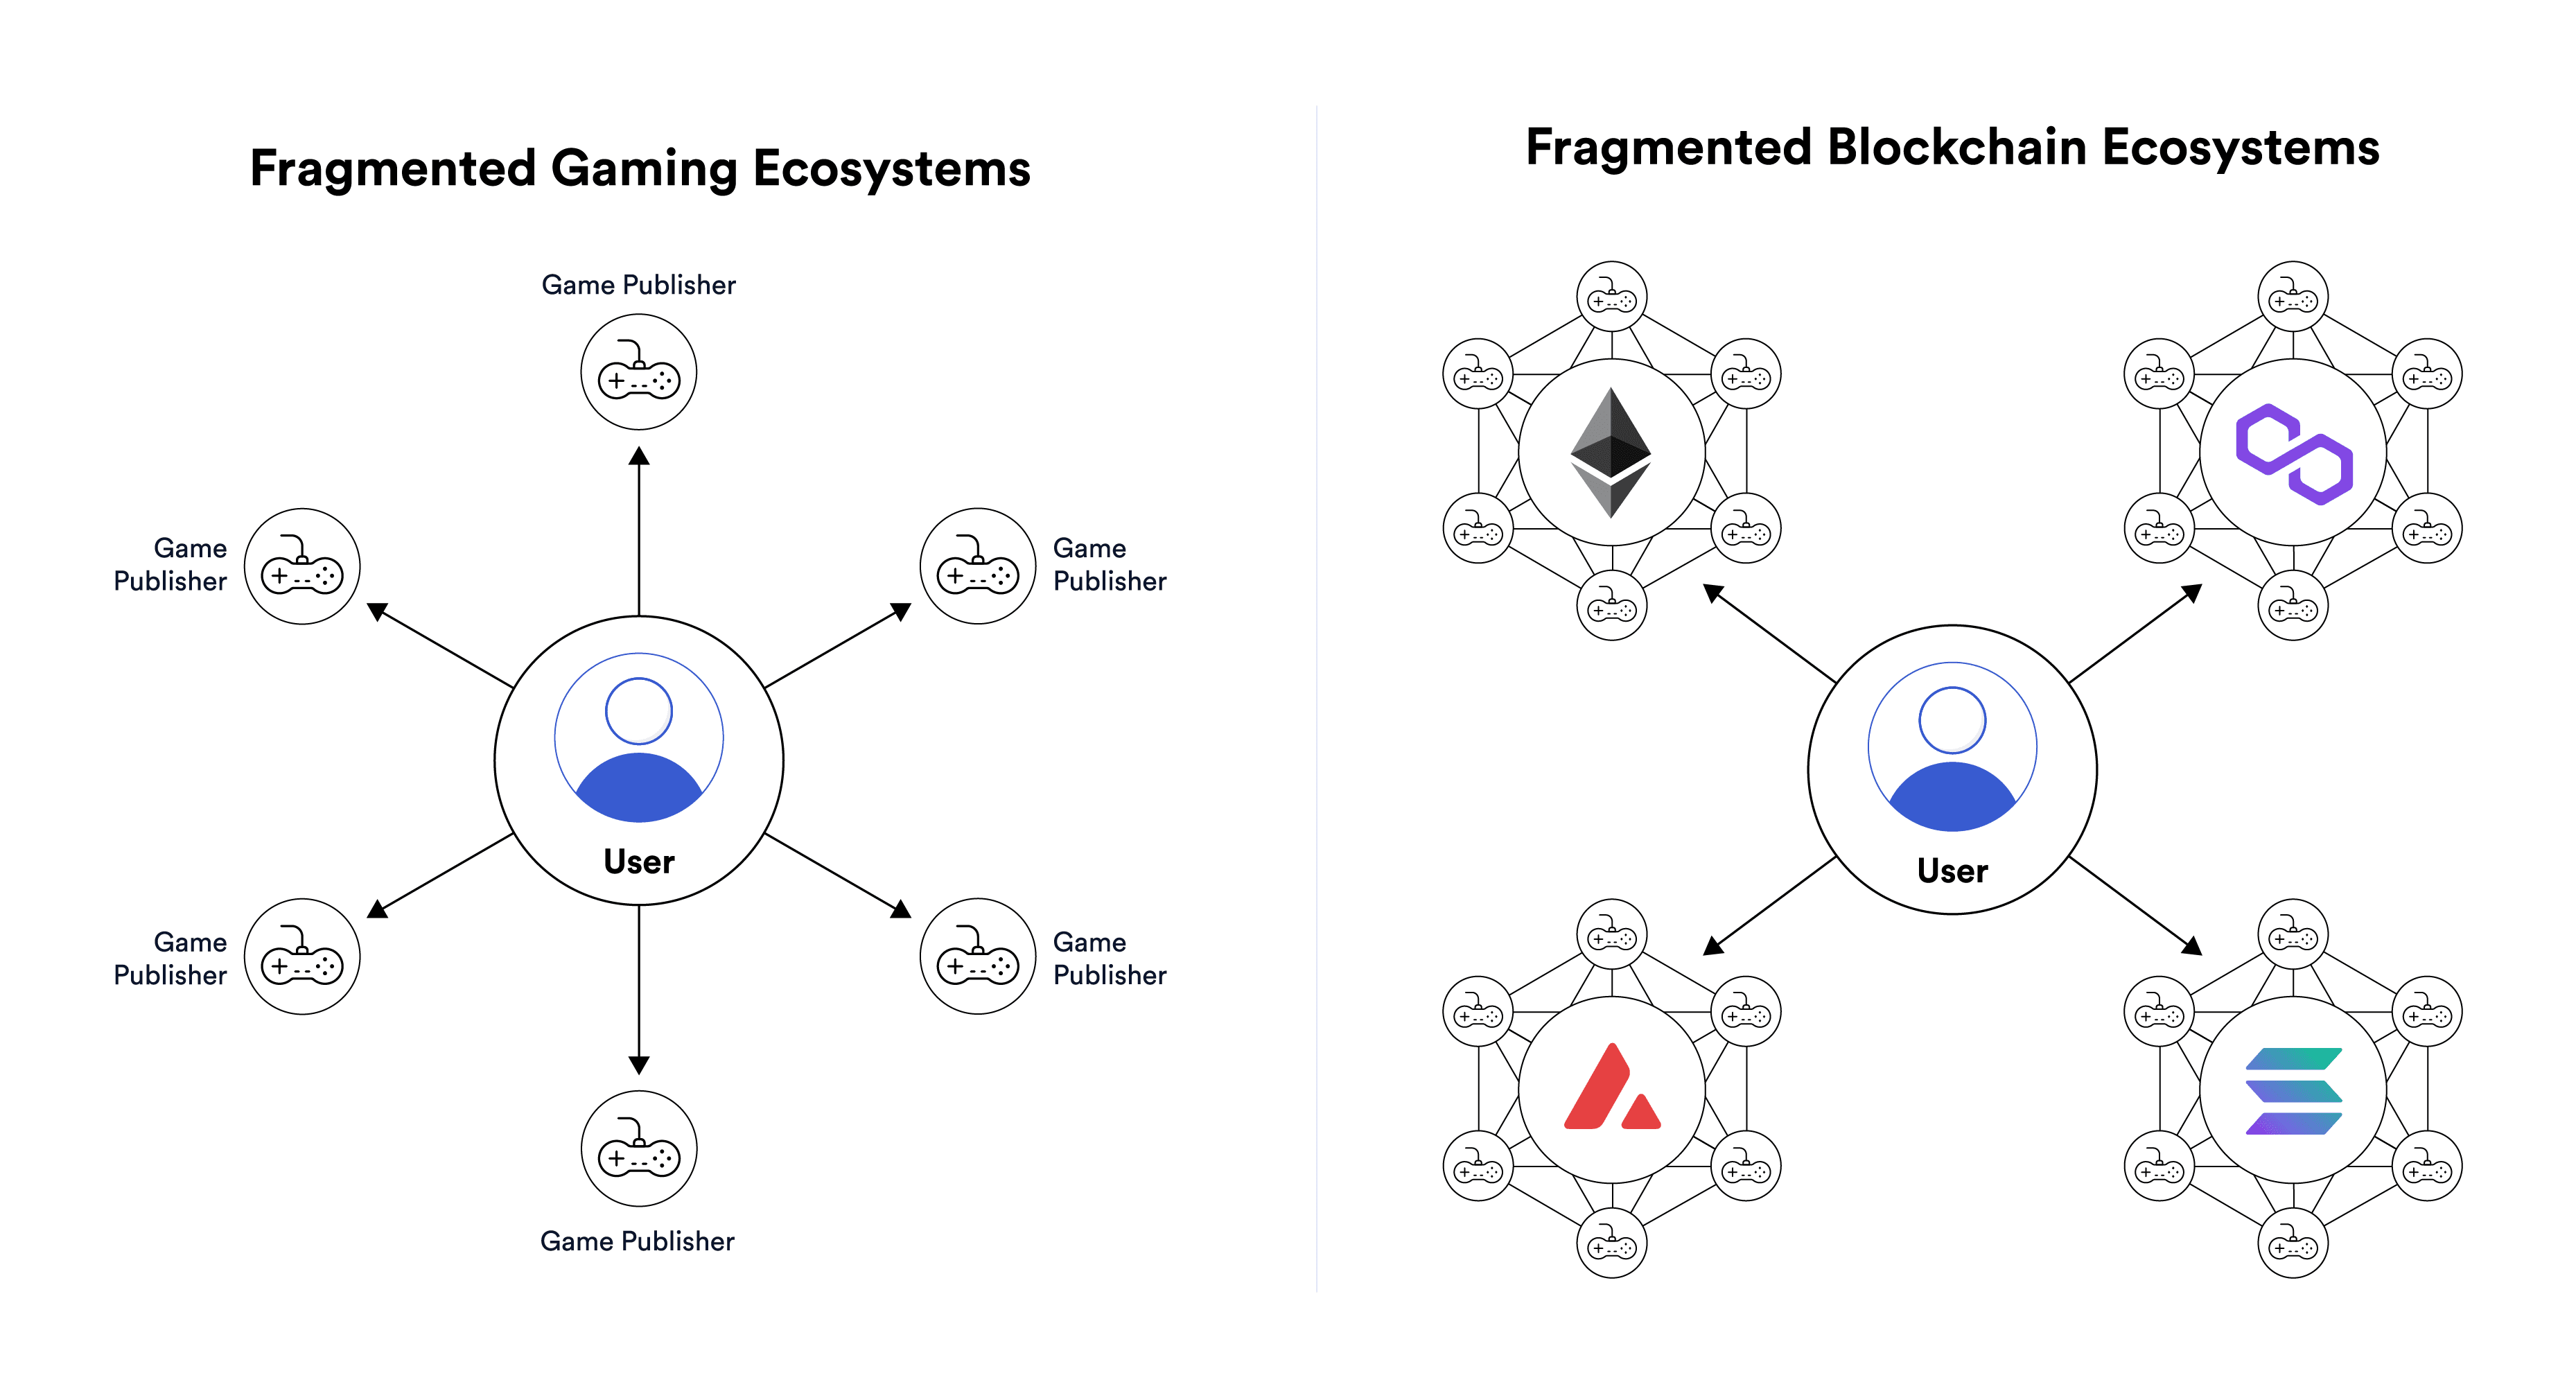 Advantages and Disadvantages to Blockchain Games - fragmented